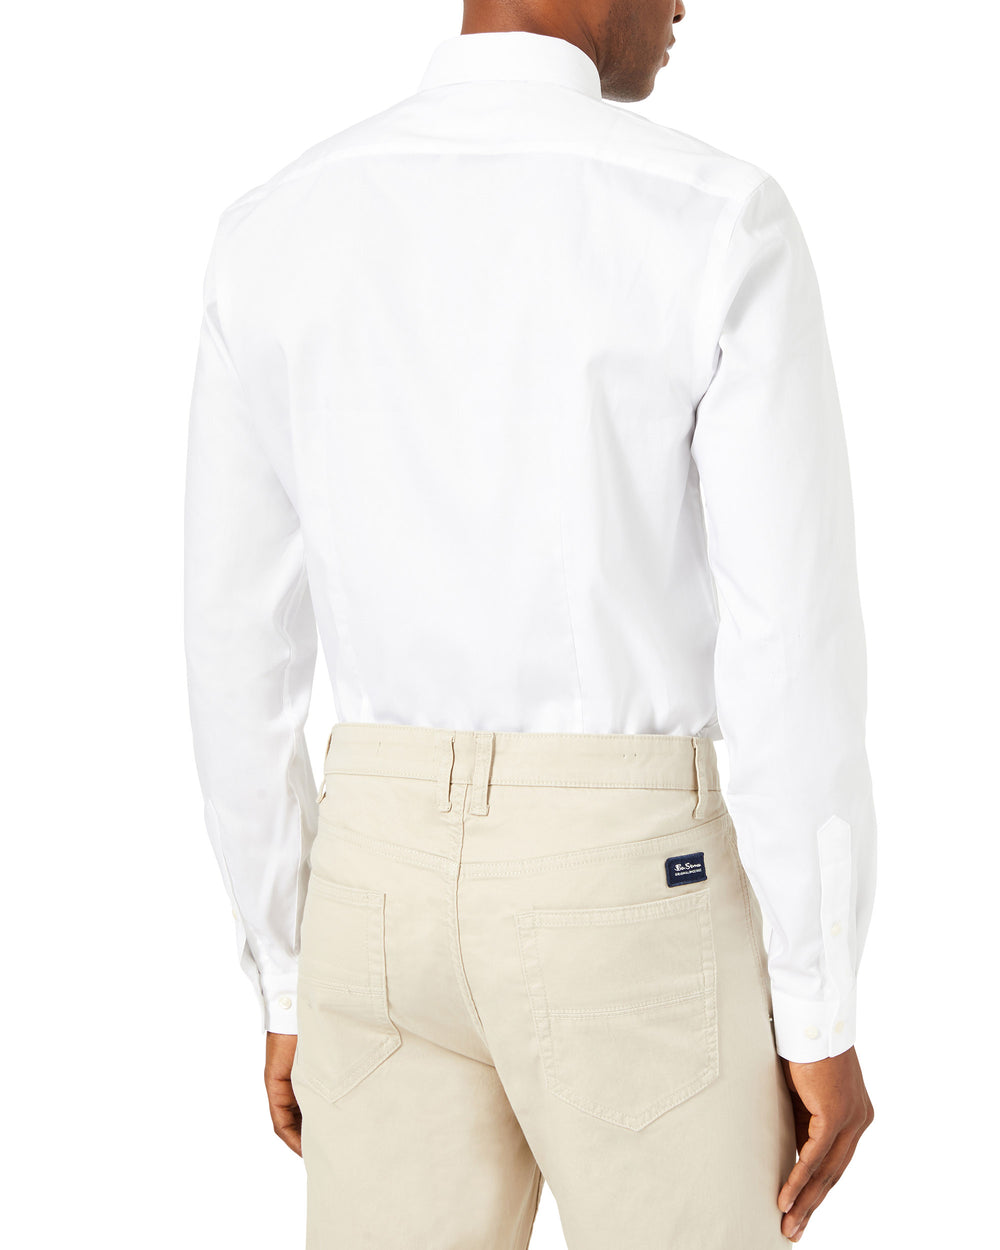 Pinpoint Skinny Fit Dress Shirt - White